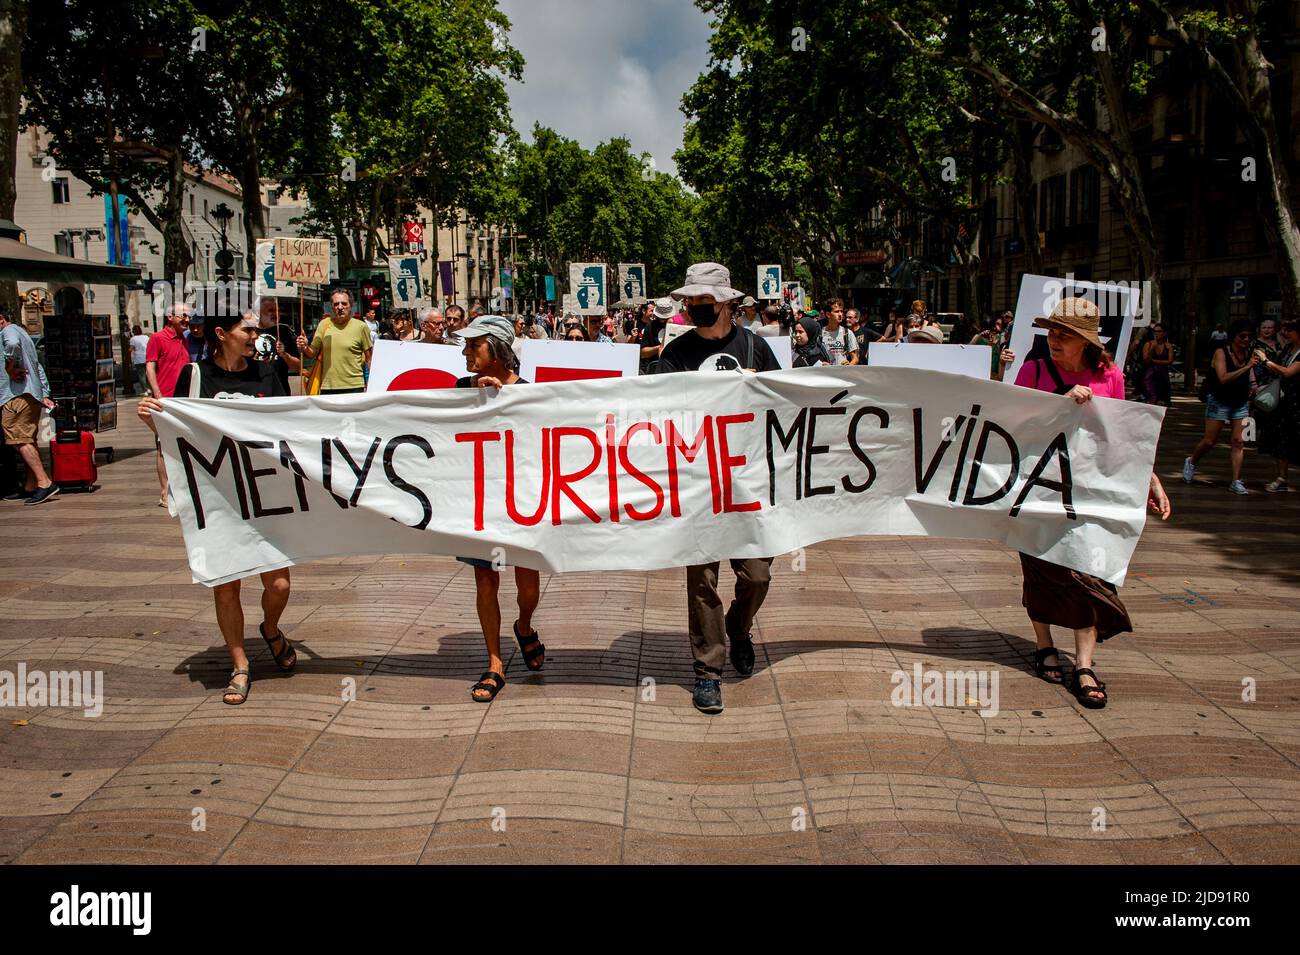 Barcelona residents march in La Rambla carrying a banner that reads 'Less Tourism, more life' during a protest against mass tourism in the city. Stock Photo